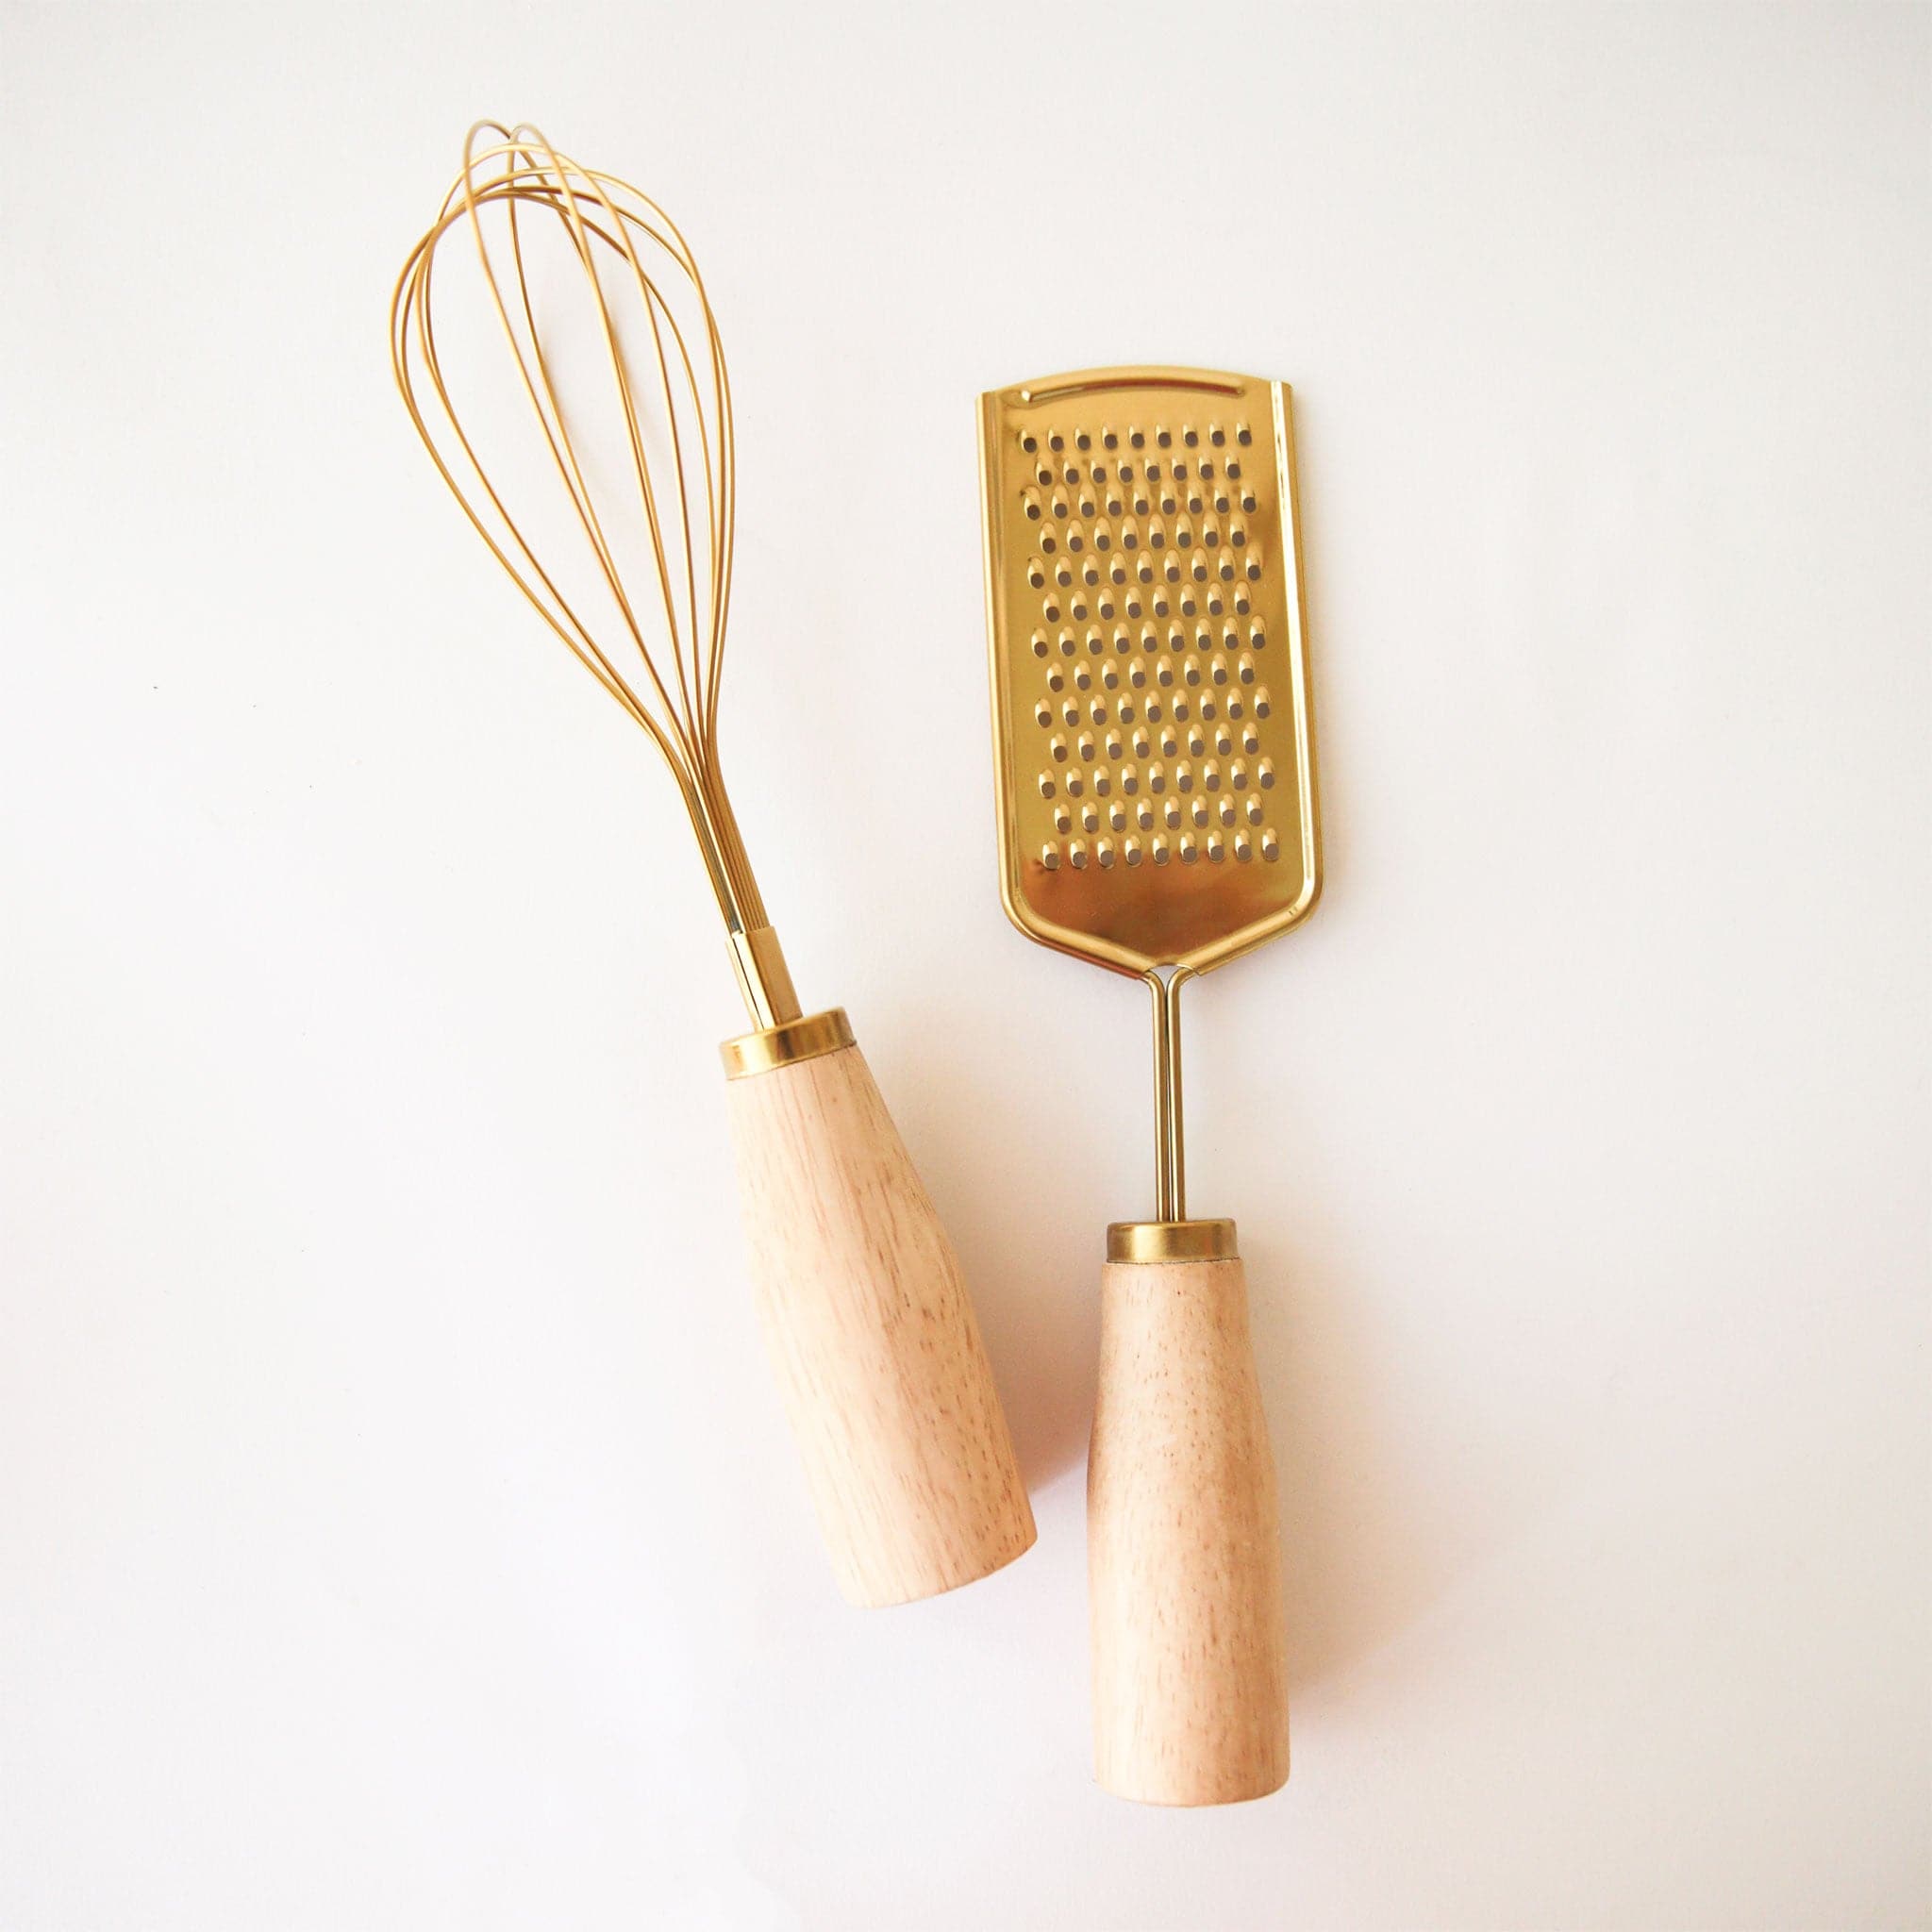 On a white background is a gold whisk with a wood handle photographed with another kitchen tool. 